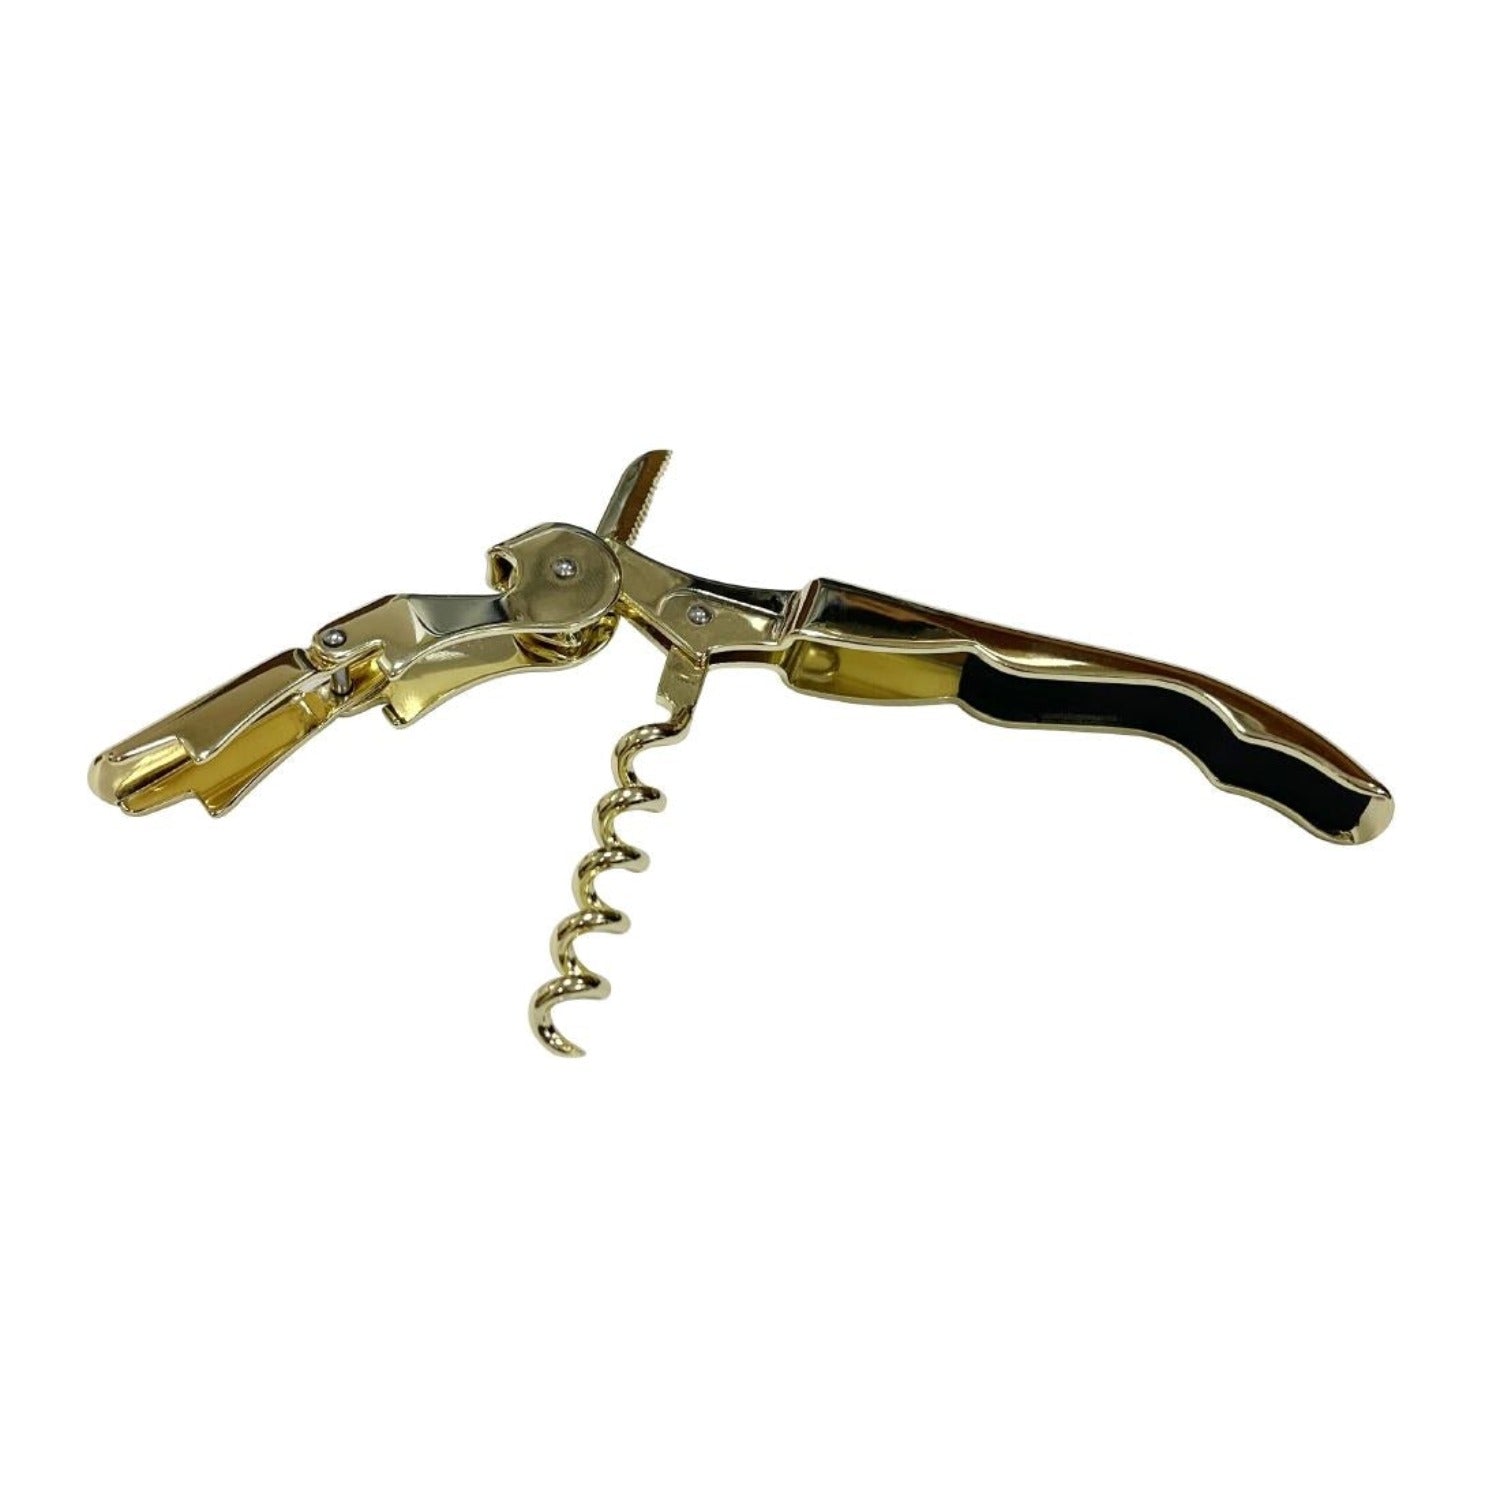 Gold plated - Double Reach Corkscrew